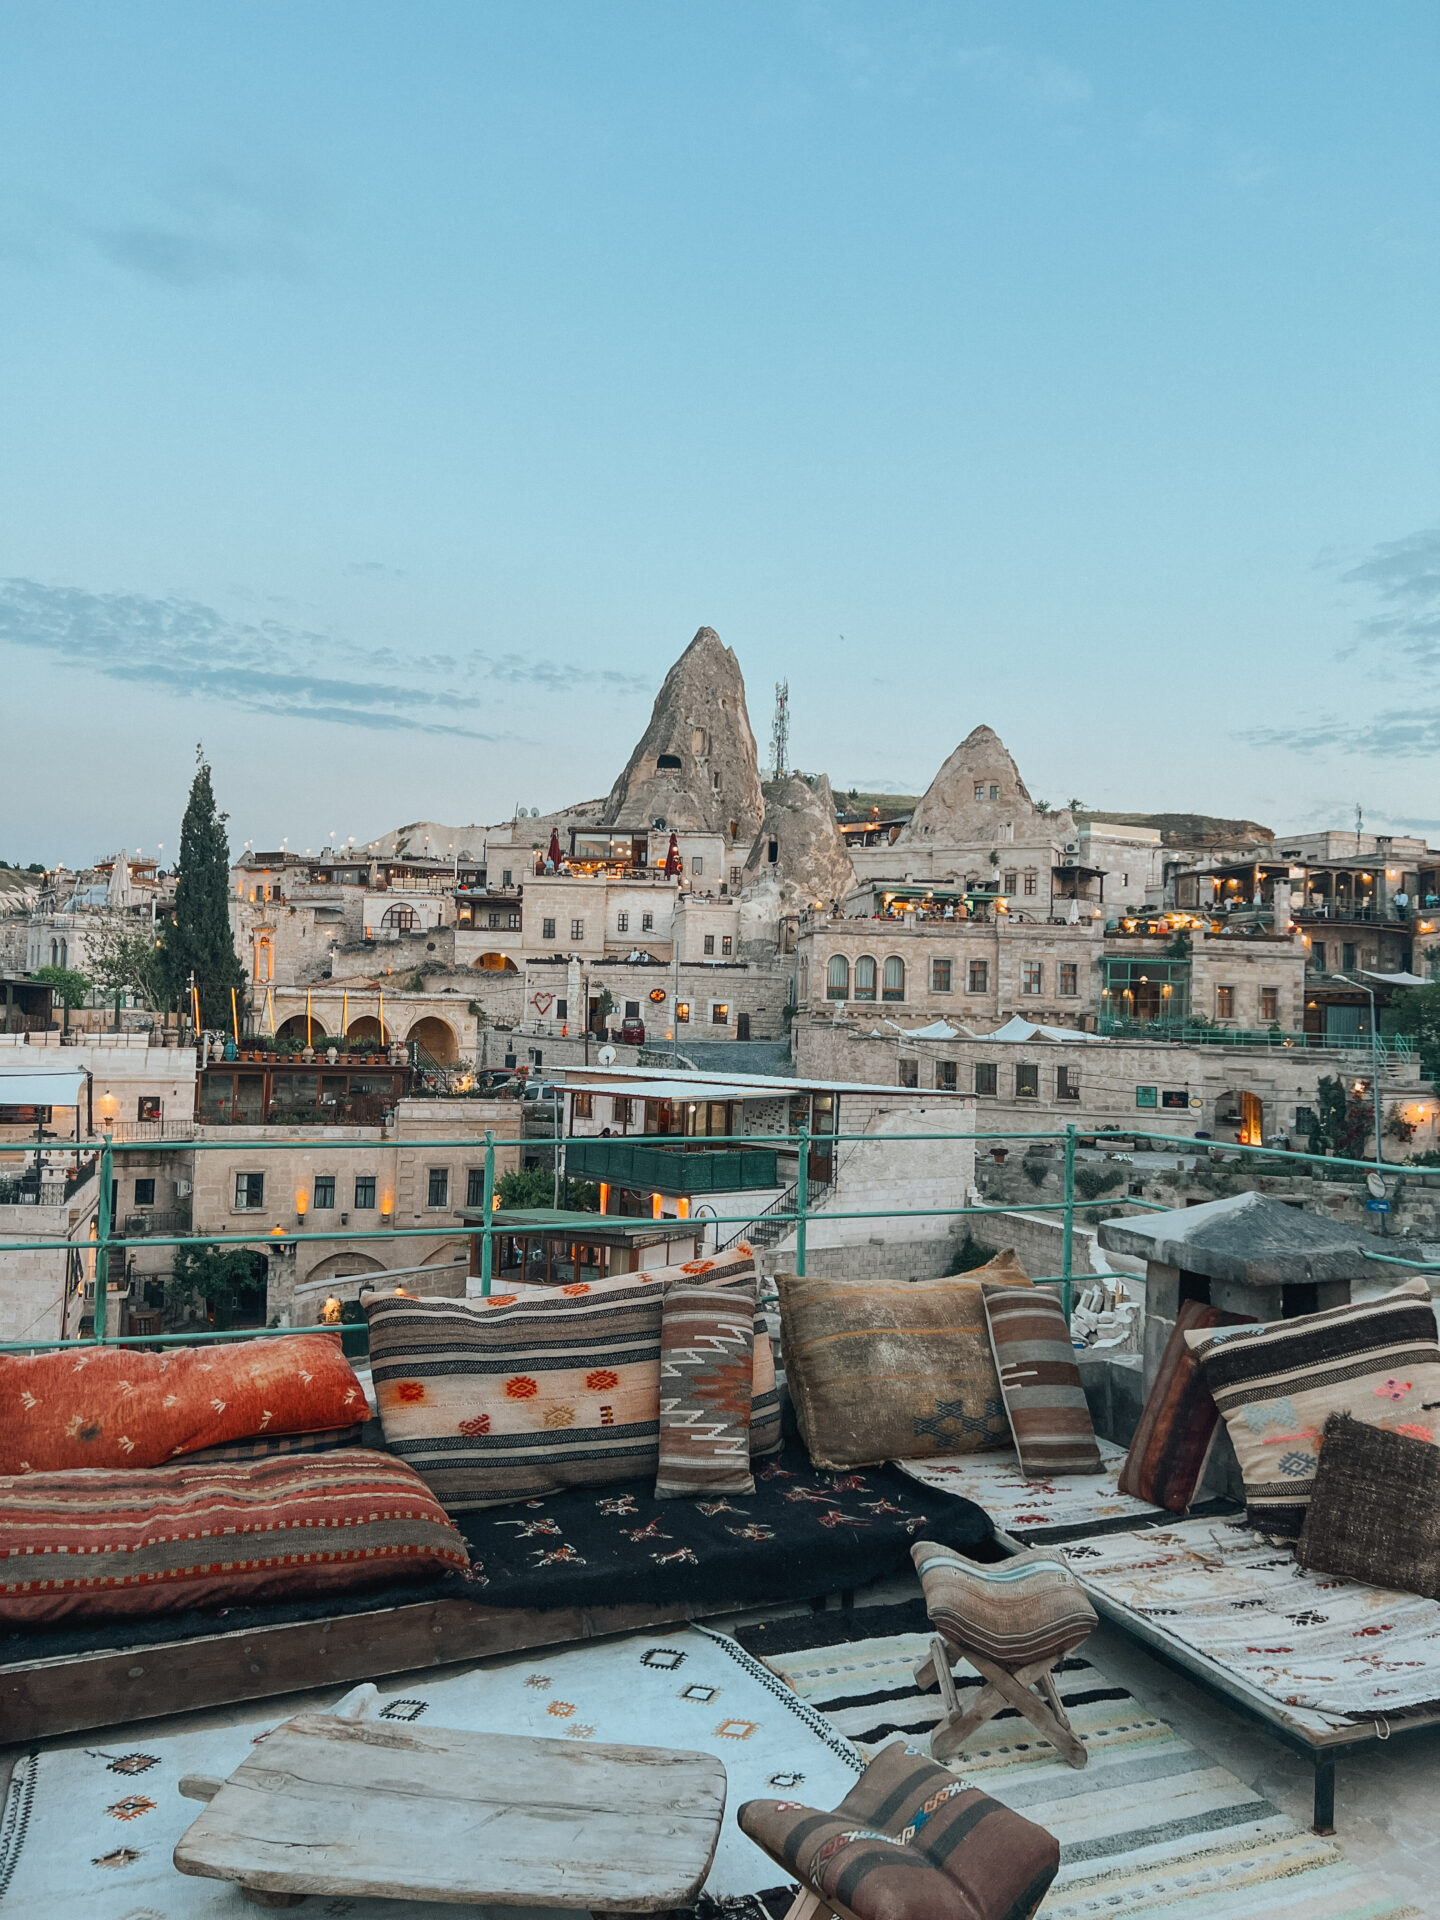 Where to stay in Cappadocia